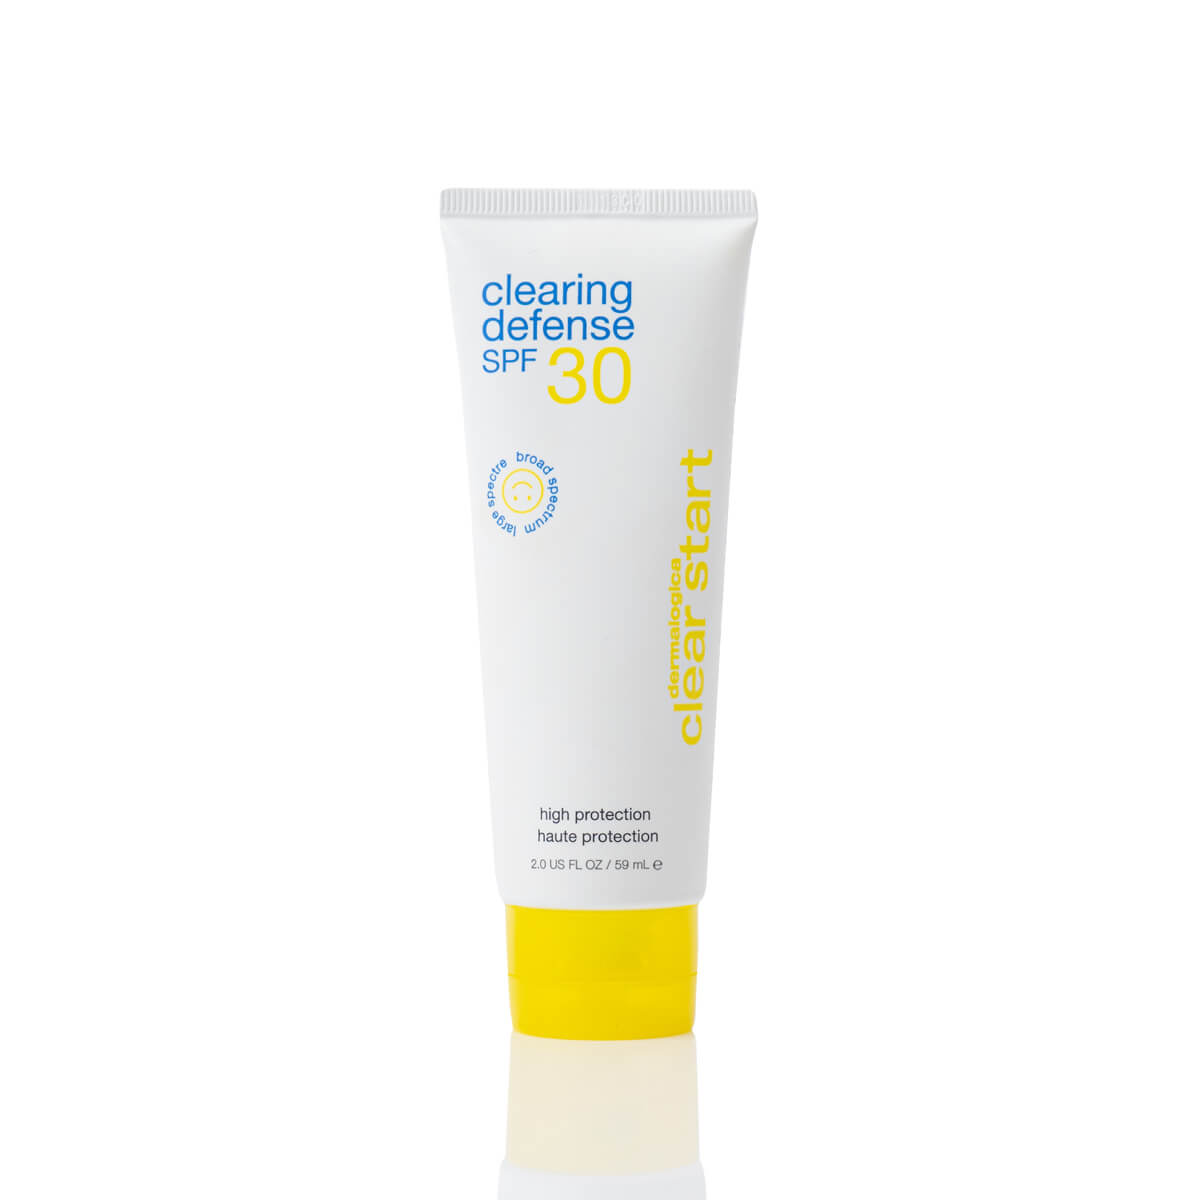 clearing defense SPF 30 (59ml)